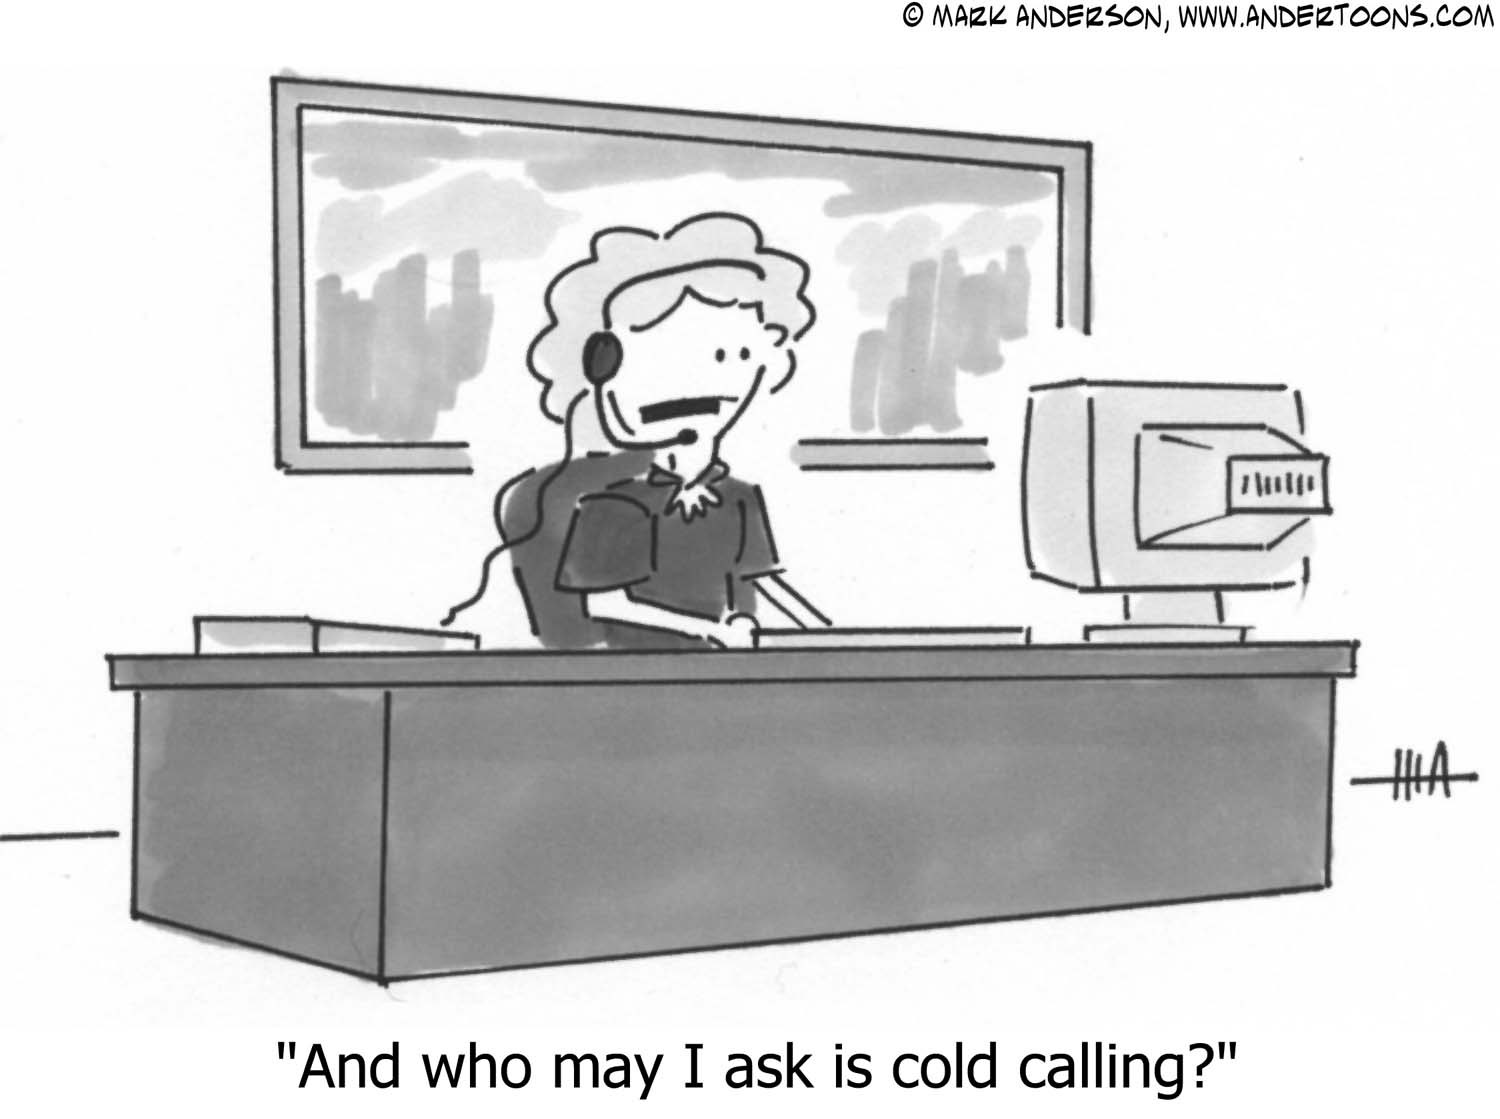 receptionist cartoon asking who's cold calling